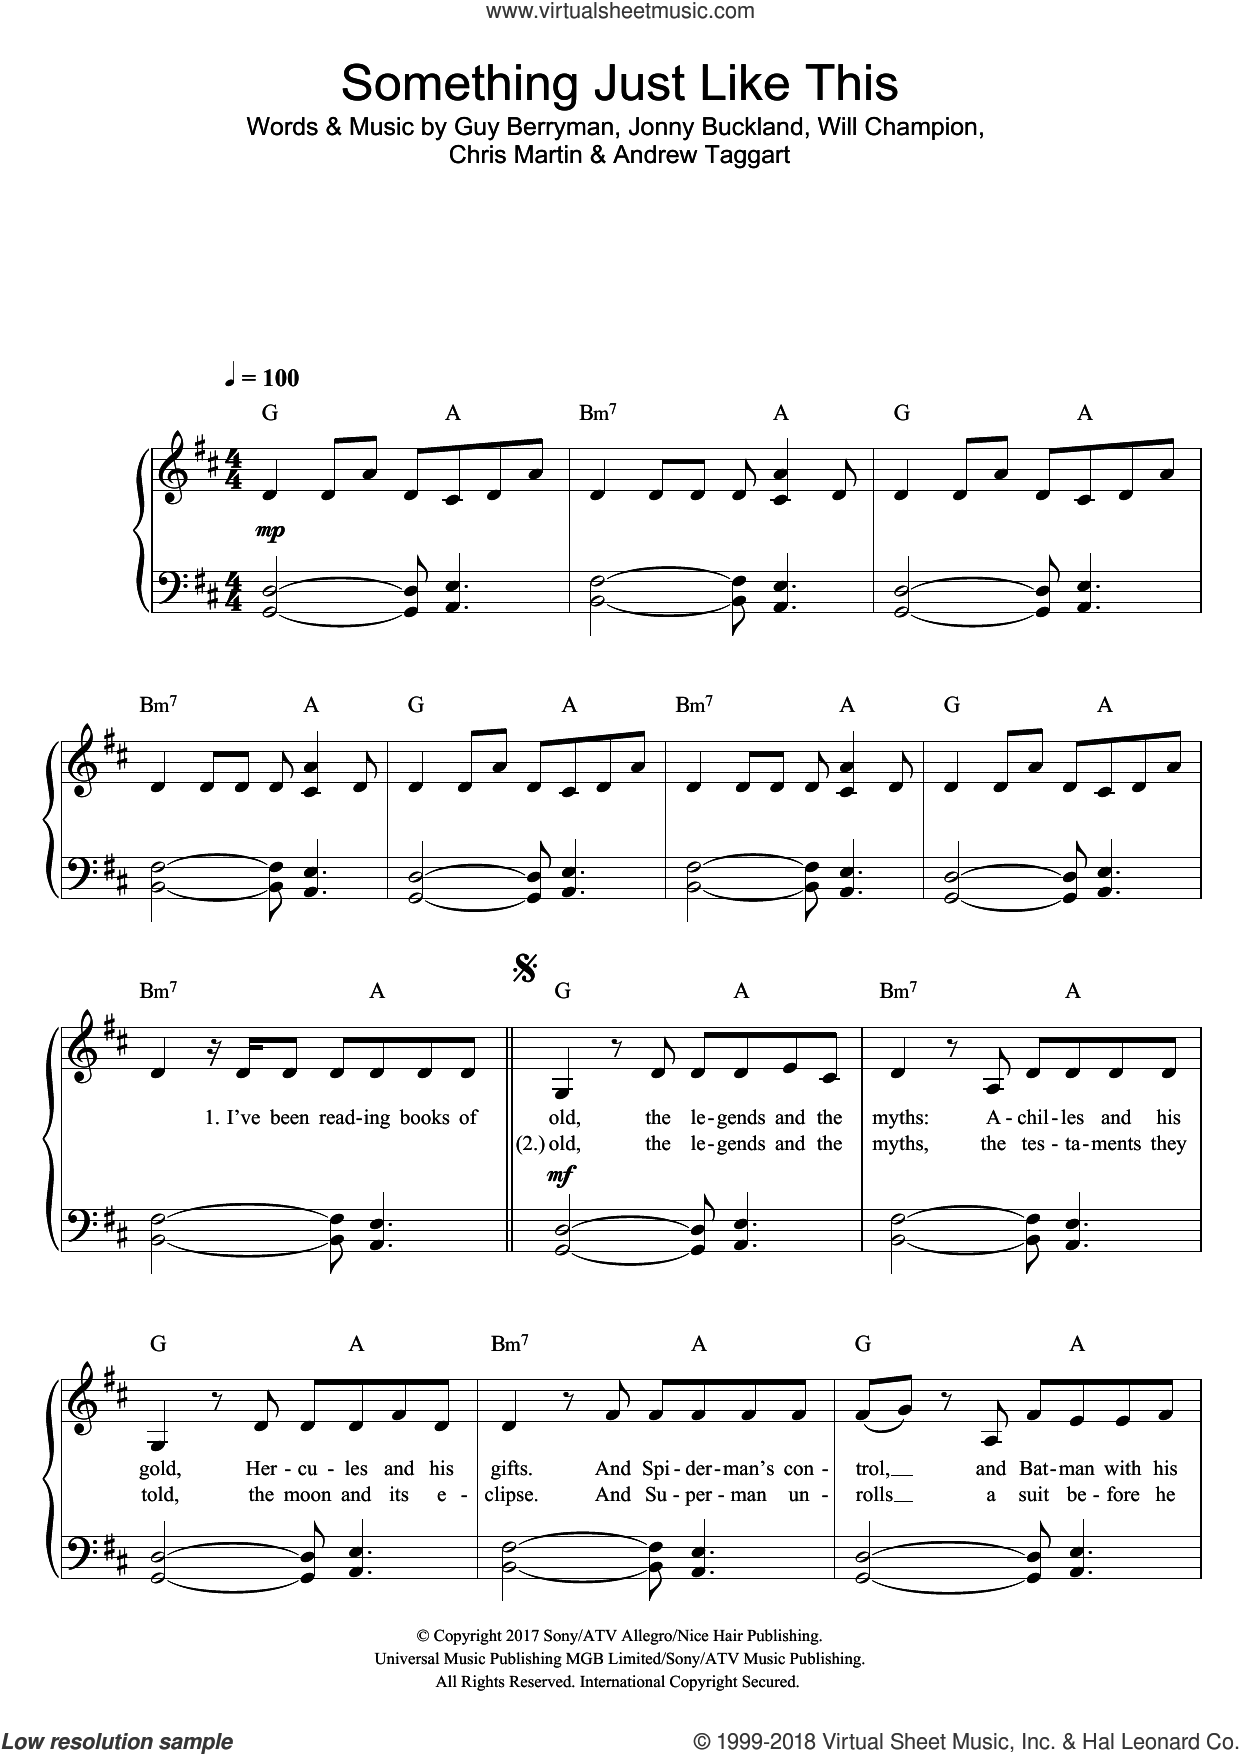 Something Just This (Tokyo Remix) sheet music for piano solo